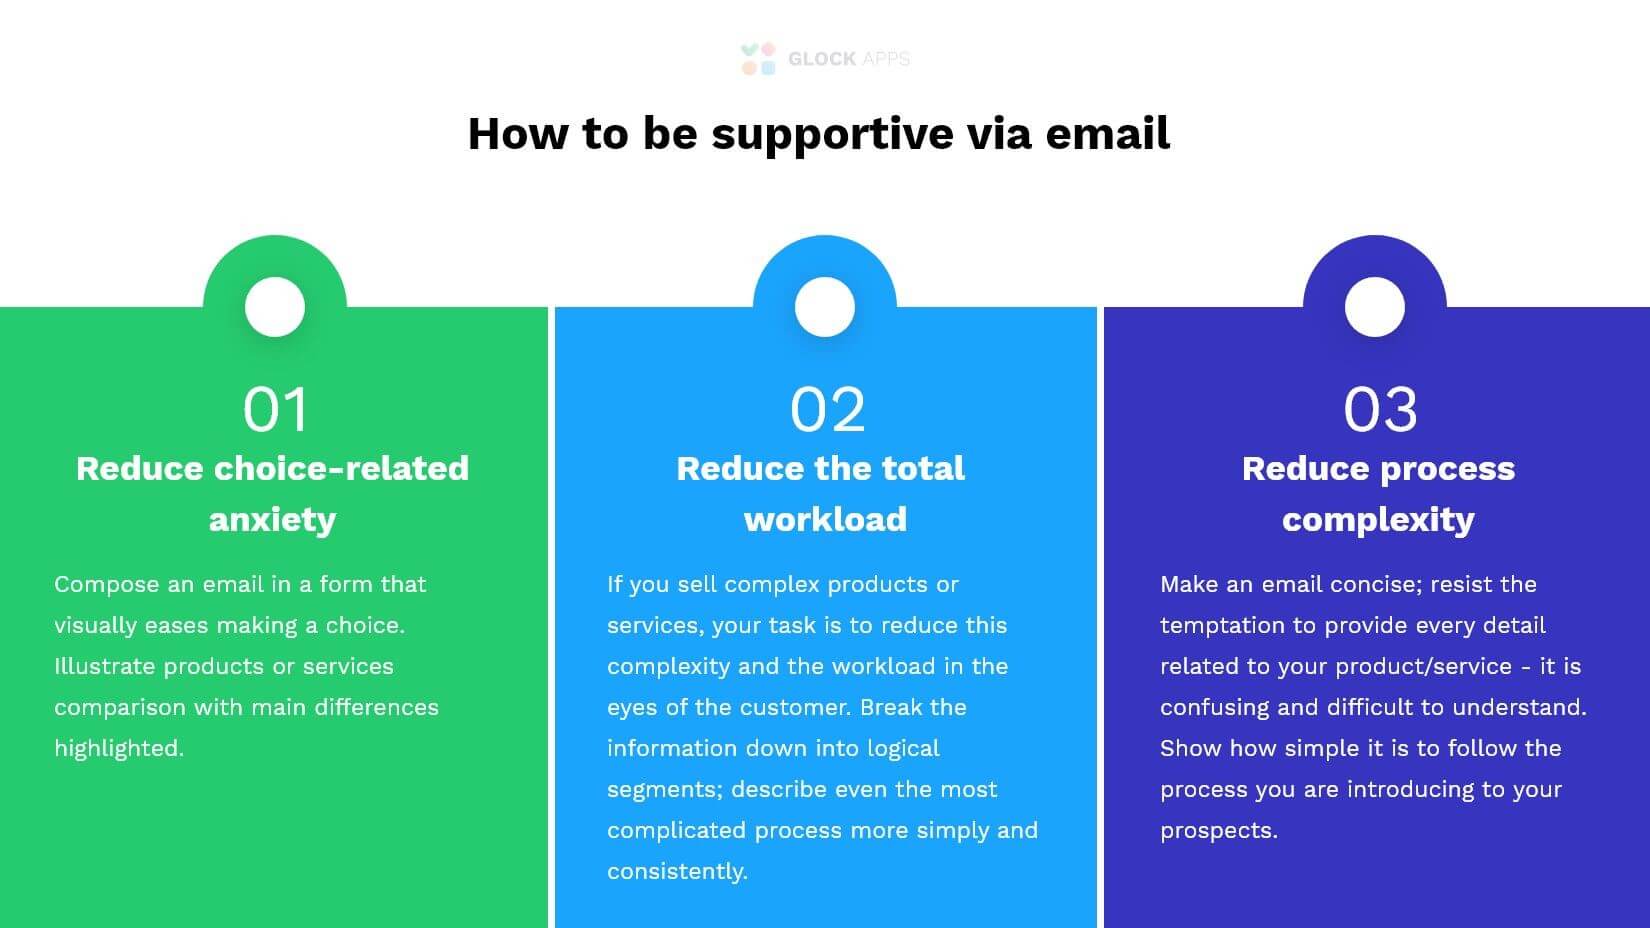 How to be supportive to your recipients via email